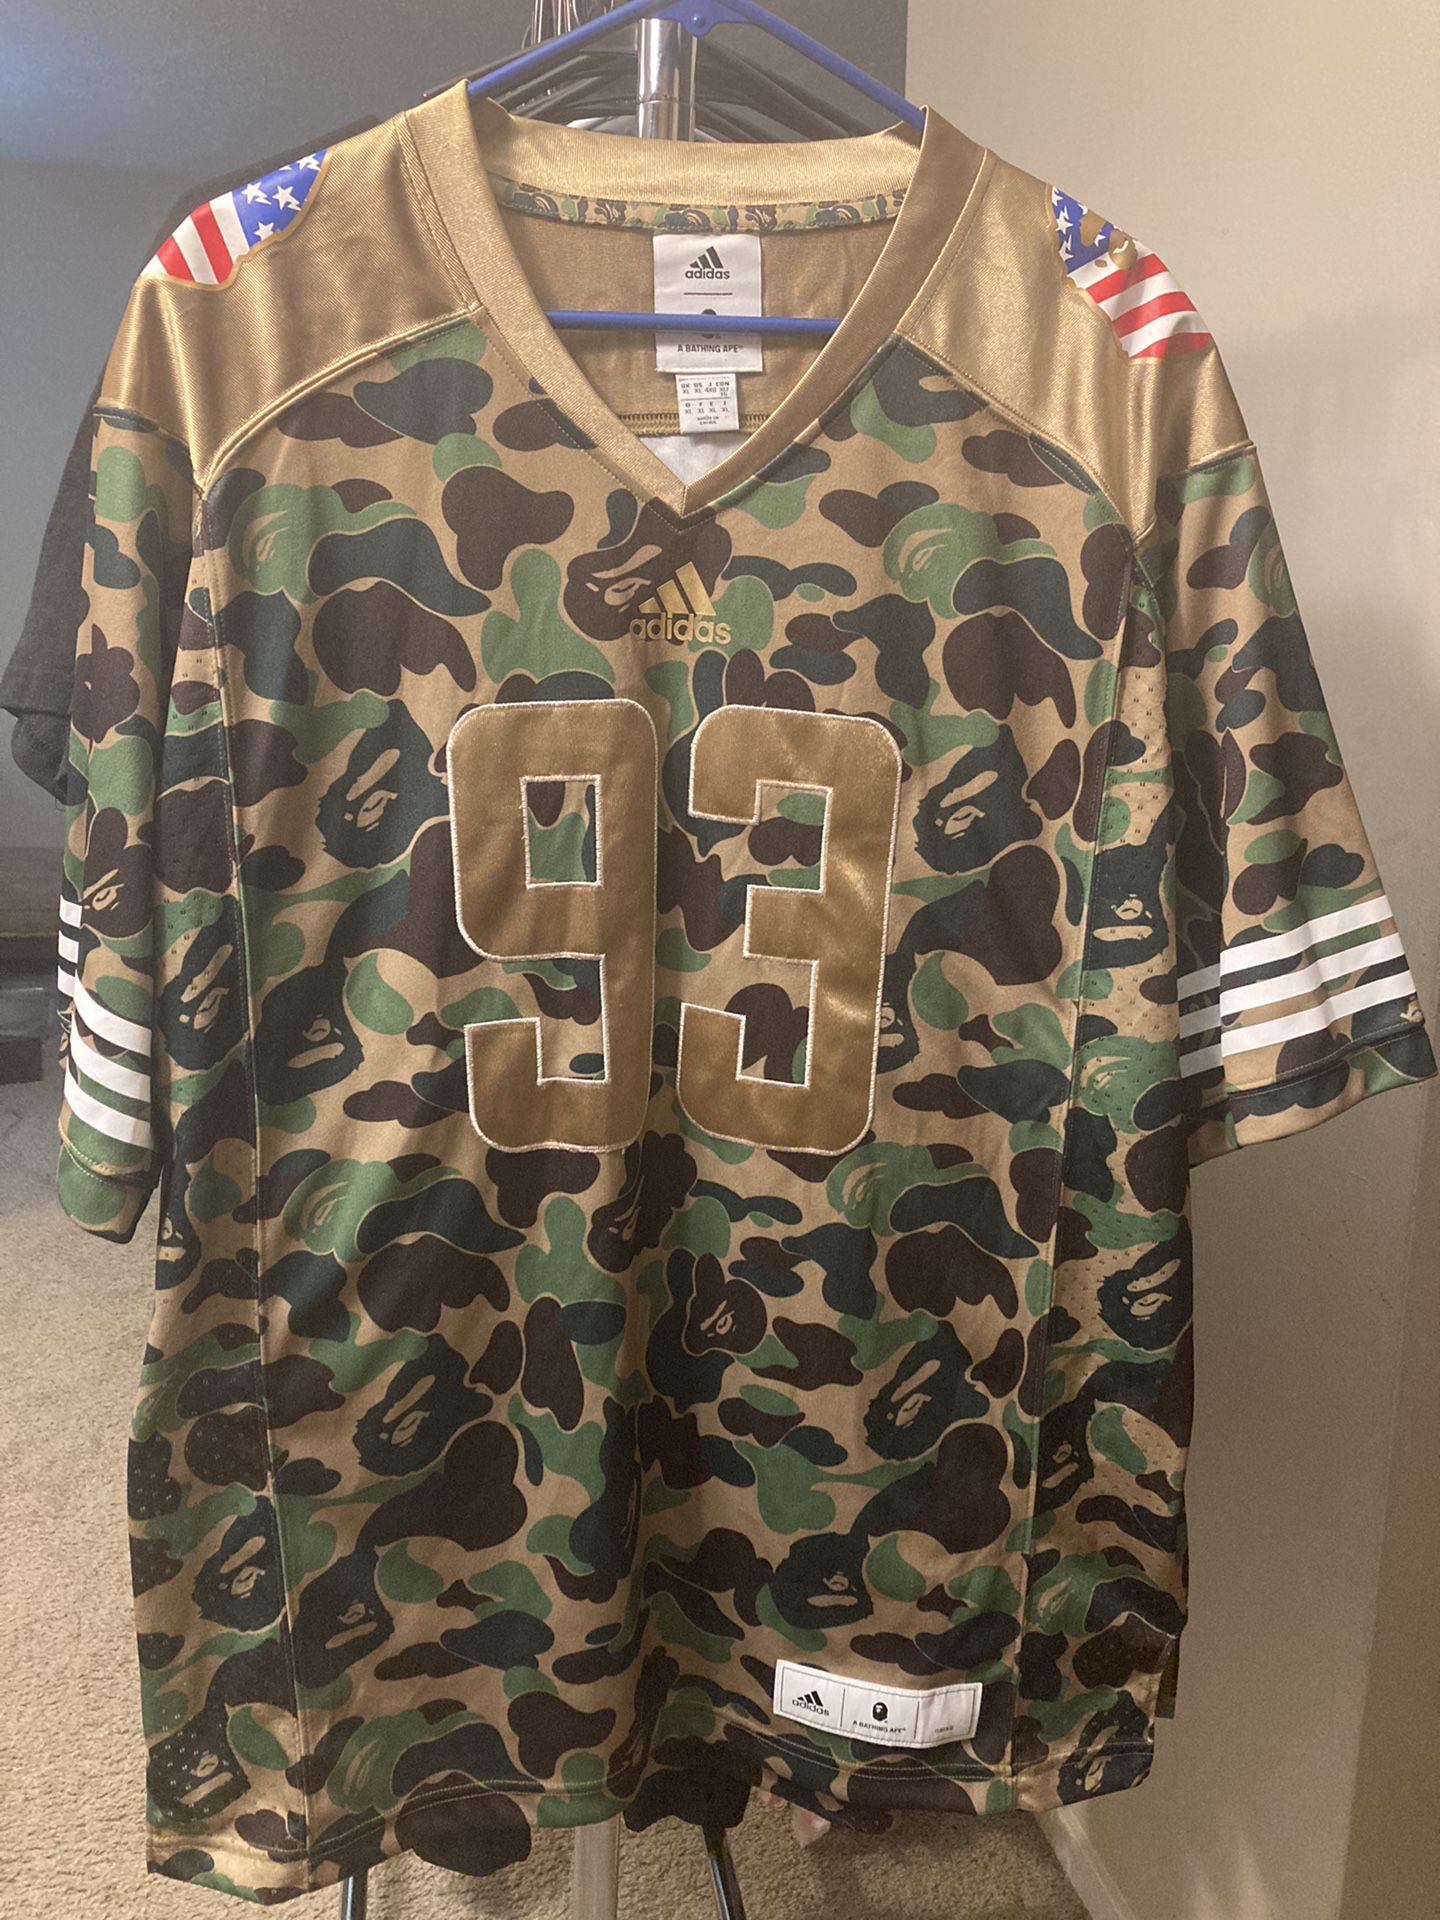 BAPE x ADIDAS 93 JERSEY for Sale in Norcross, GA - OfferUp